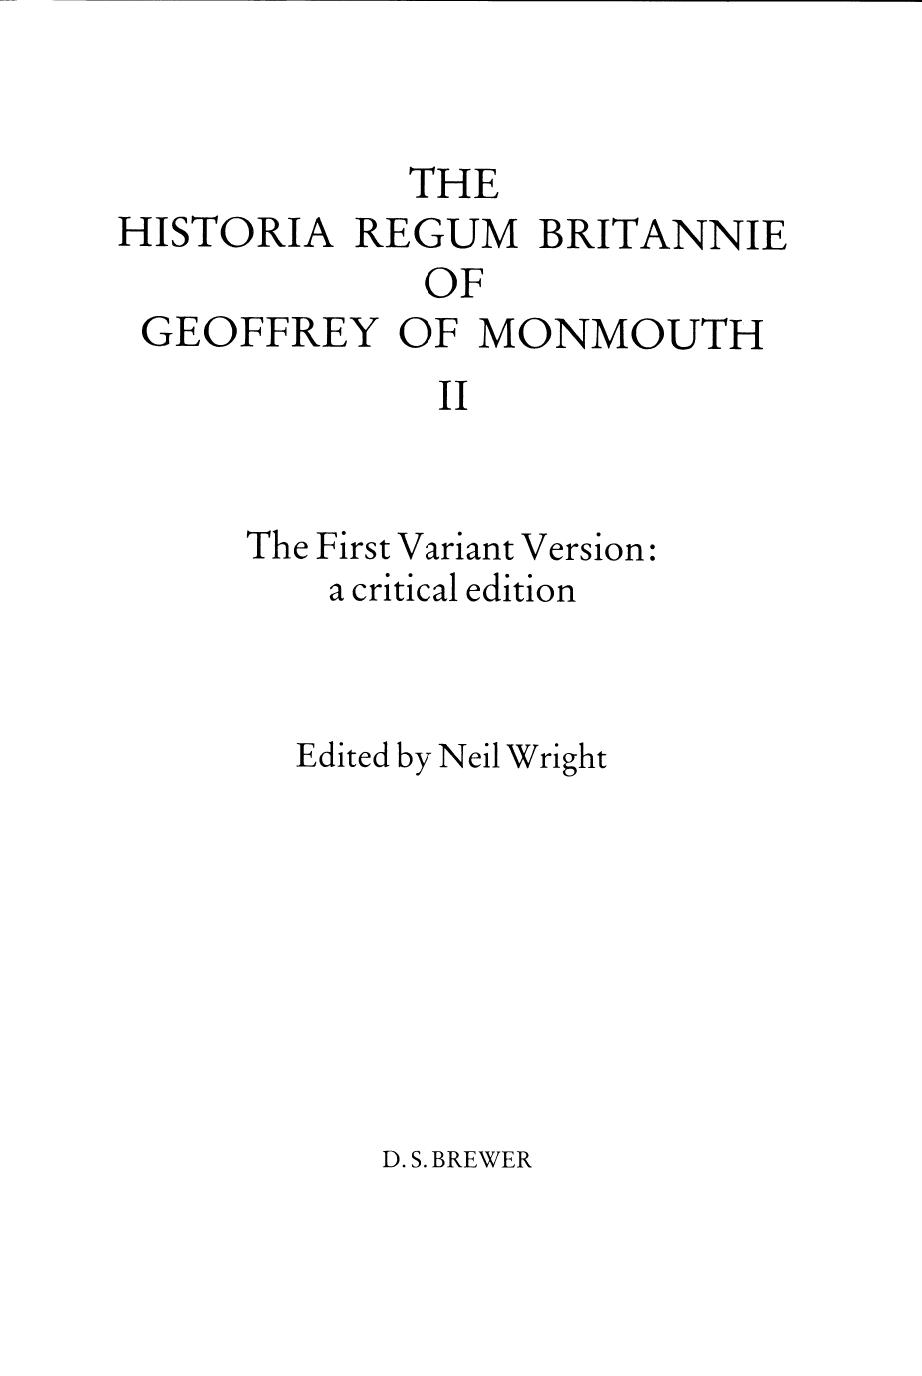 The First Variant Version: A Critical Edition by Neil Wright (ed.)